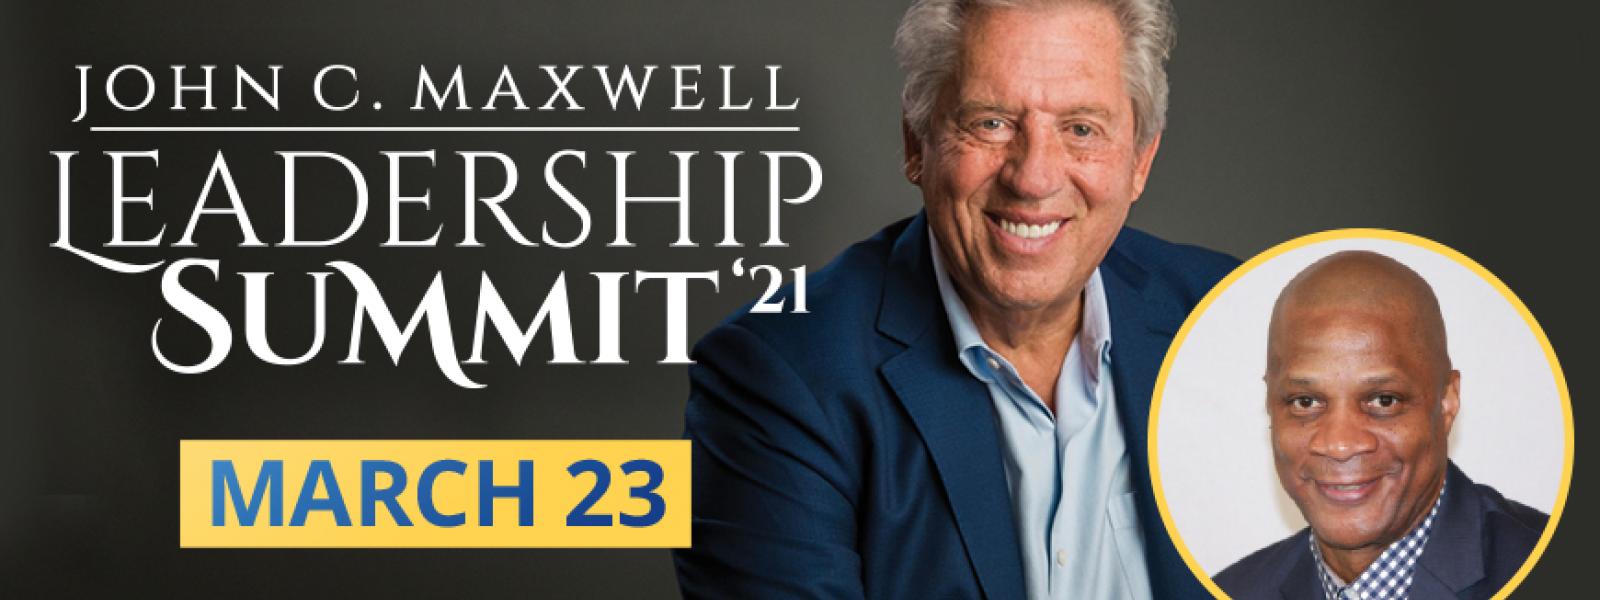 Dr. John Maxwell and baseball legend Darryl Strawberry are coming to CIU